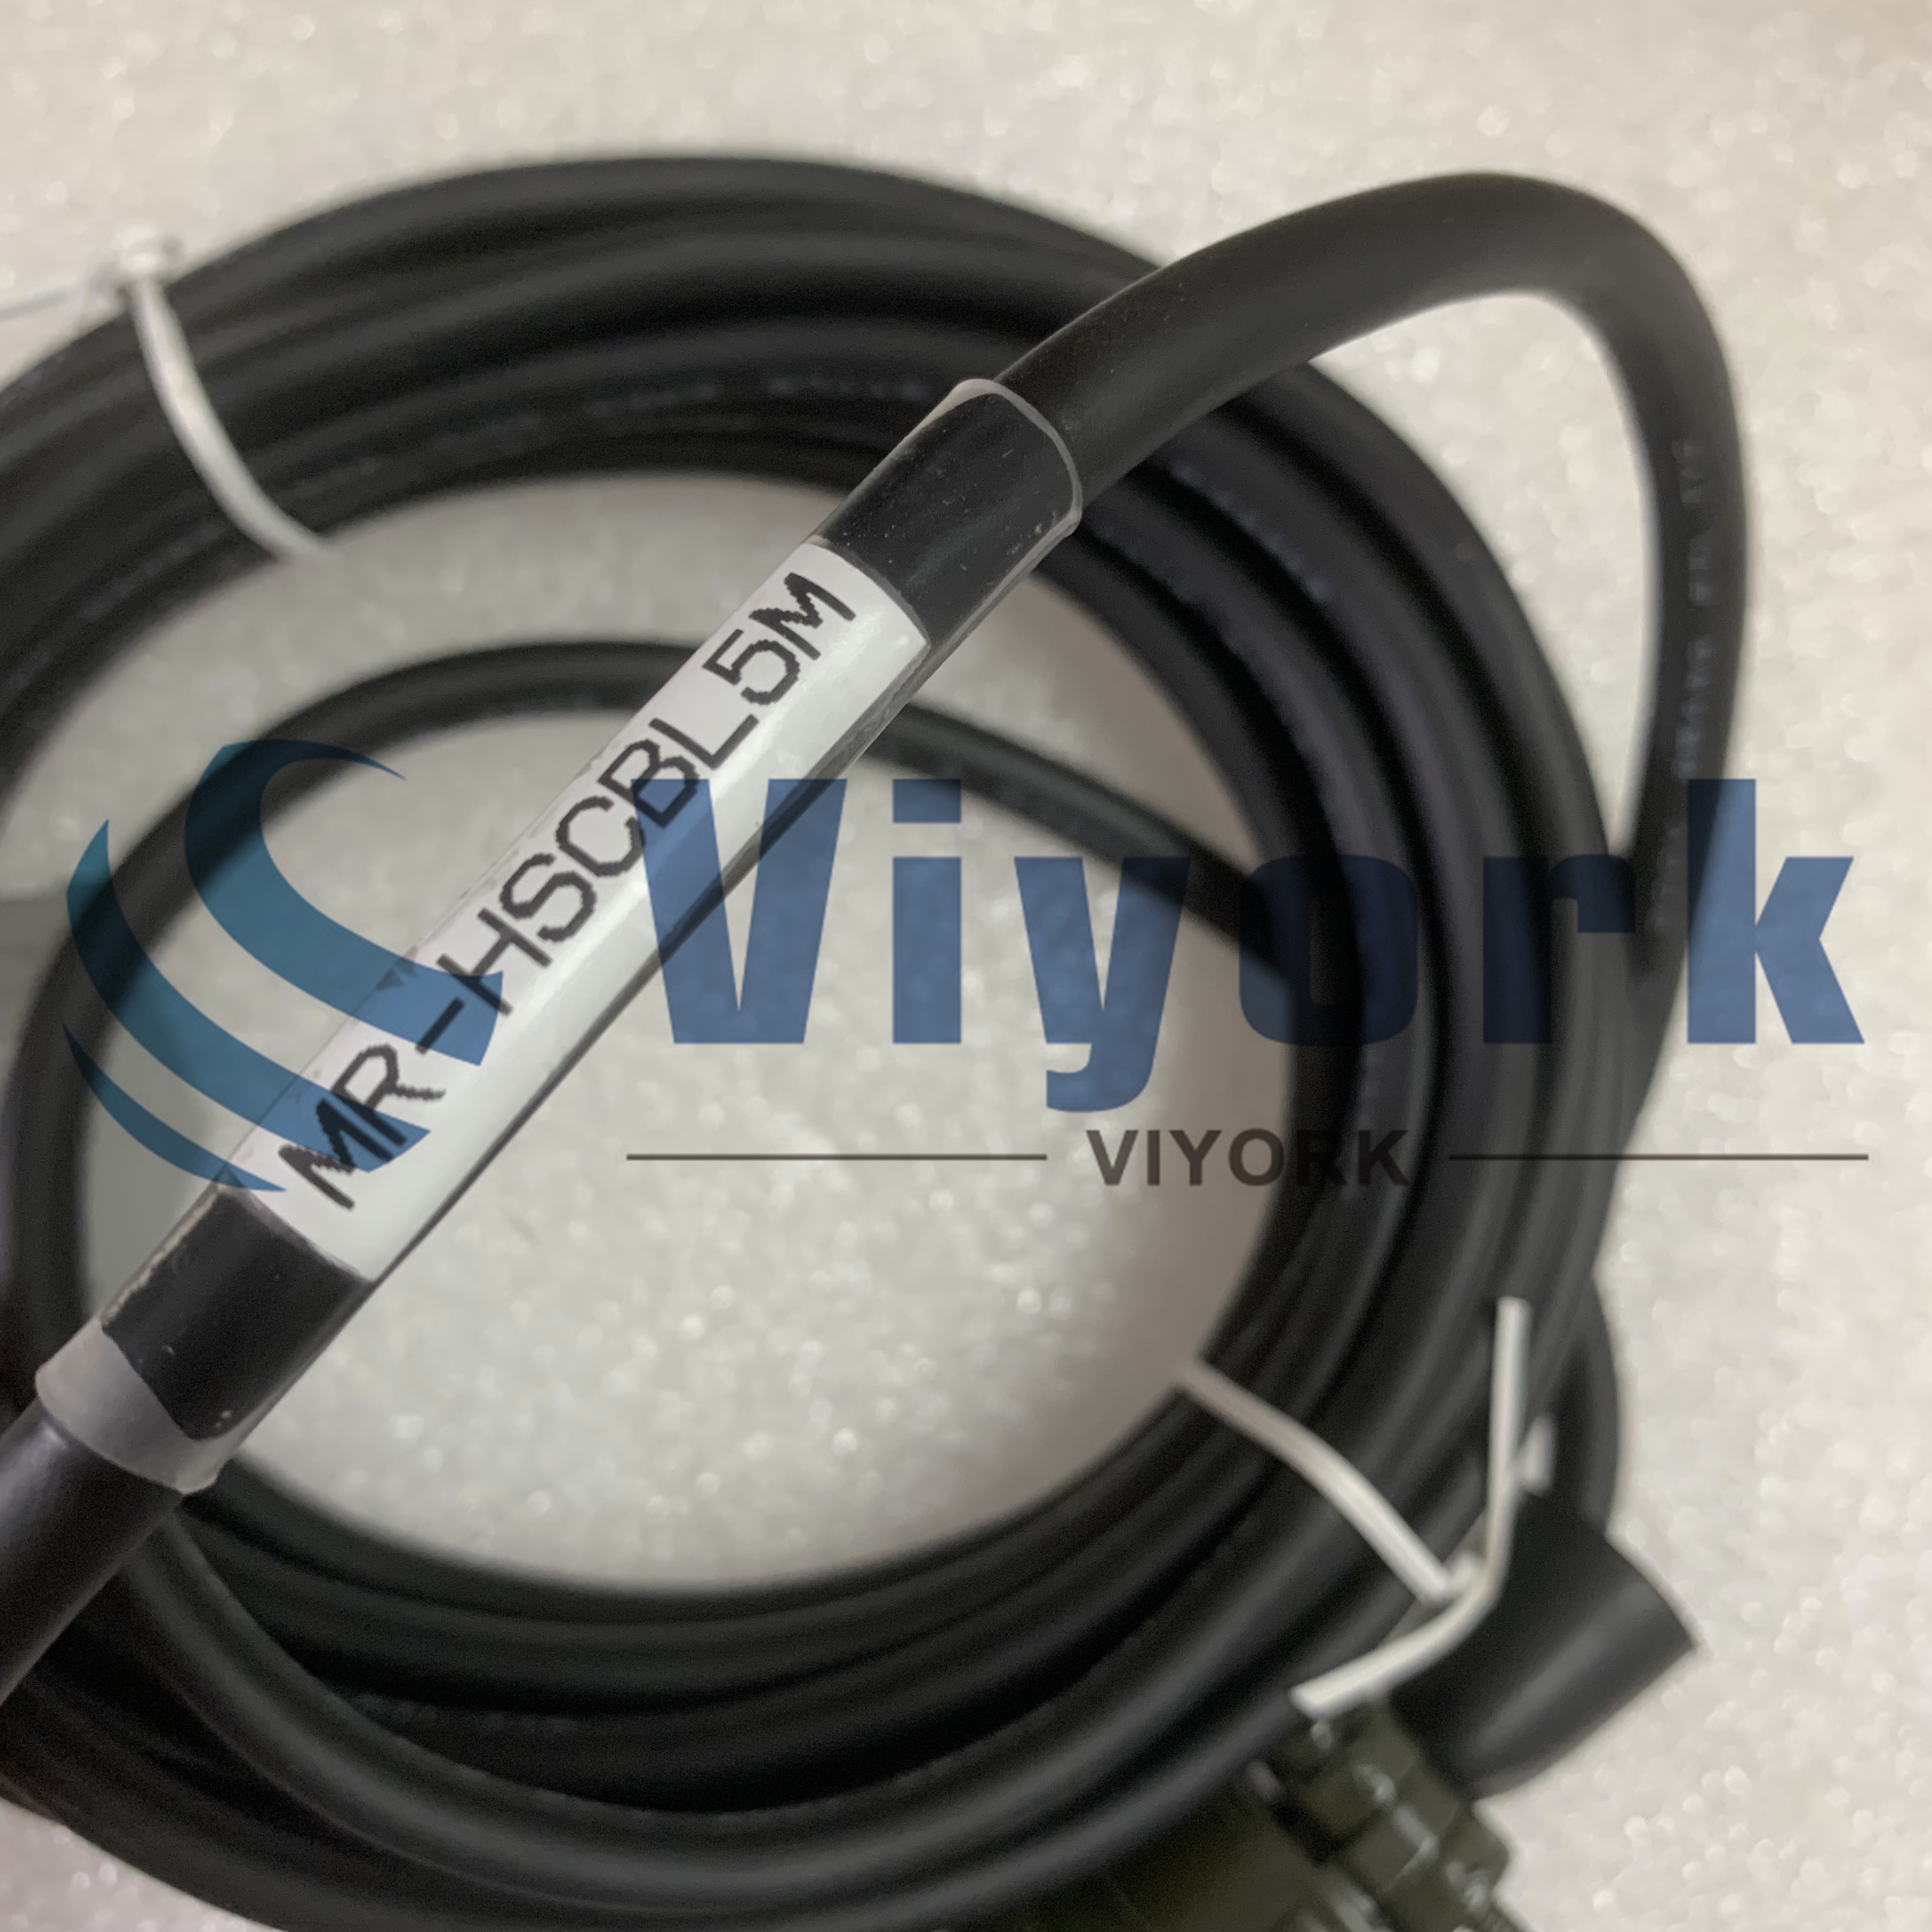 Mitsubishi MR-HSCBL 5M CABLE NEW AND MADE IN CHINA